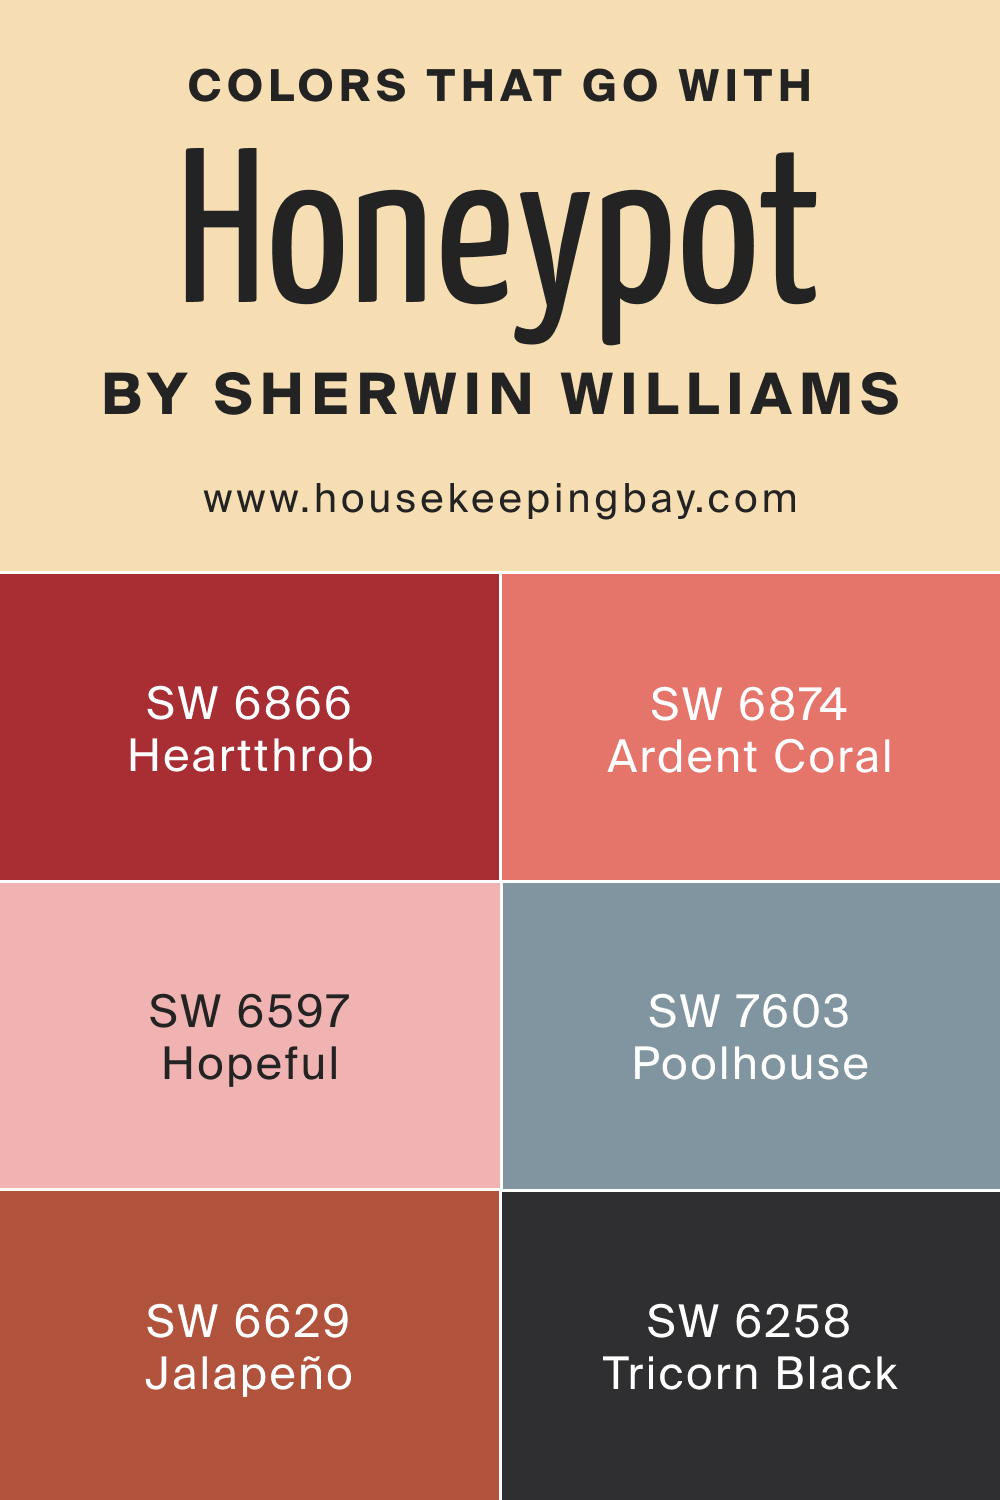 Colors that go with SW 9663 Honeypot by Sherwin Williams